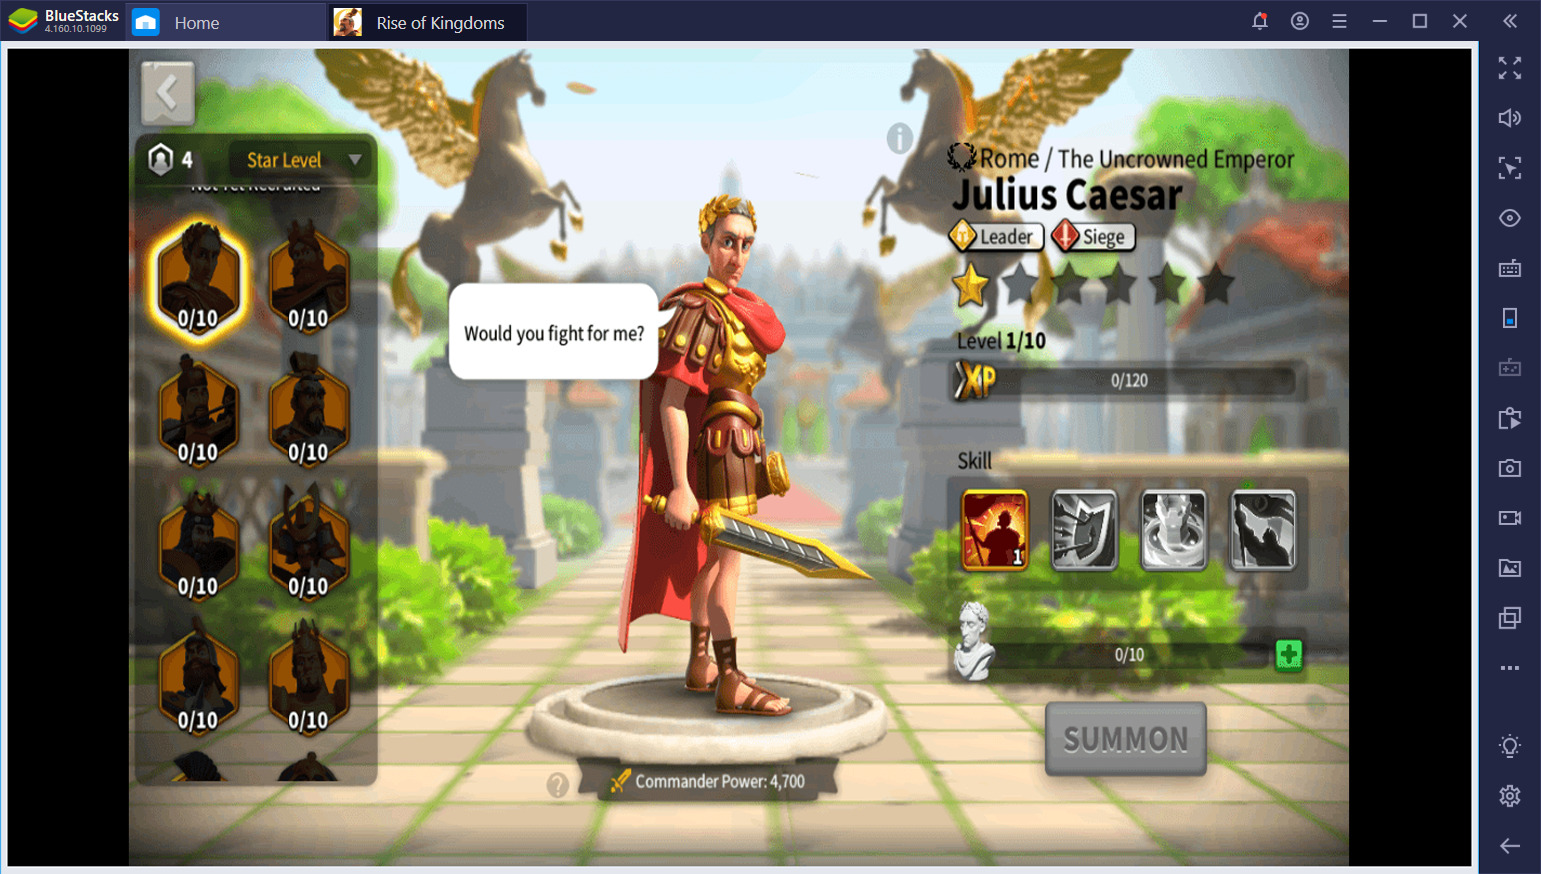 Commanders Guide for Rise of Kingdoms on PC: Combat and Pairing Up Strategies